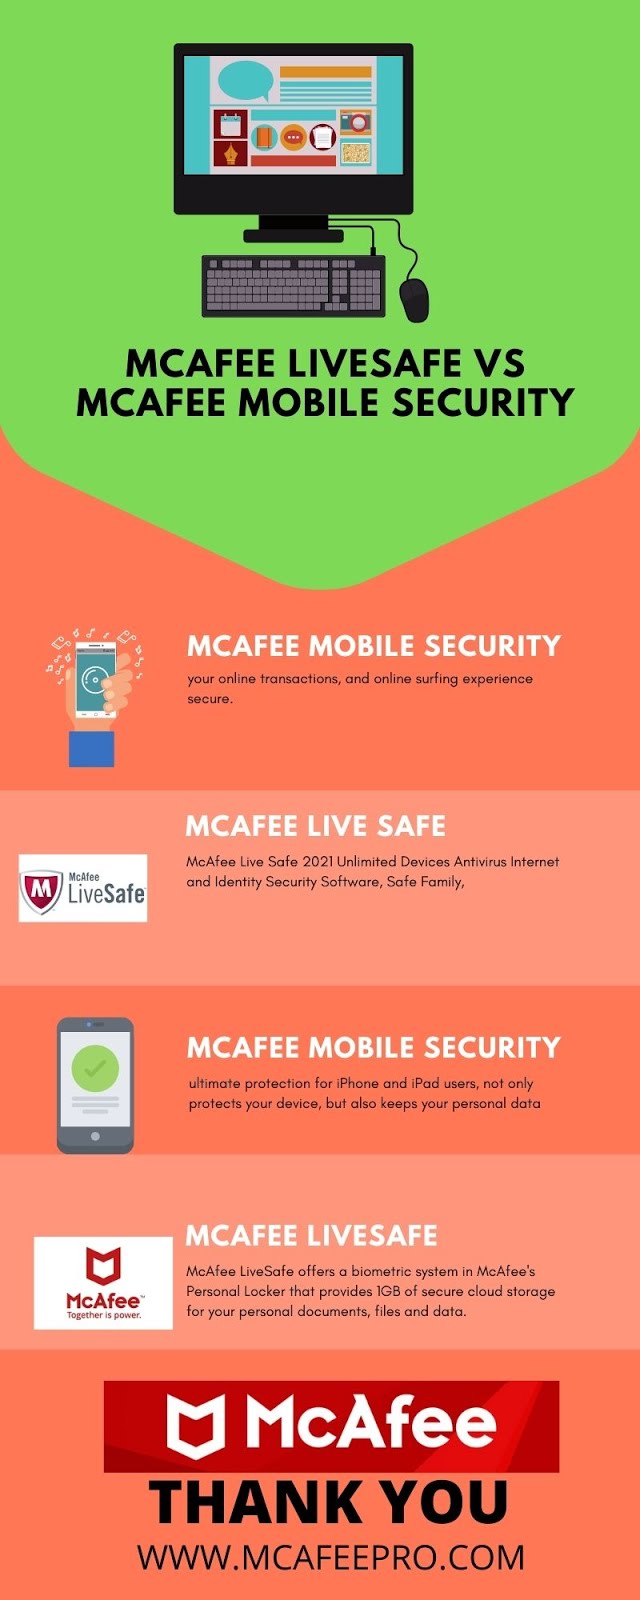 Mcafee Small Business Security